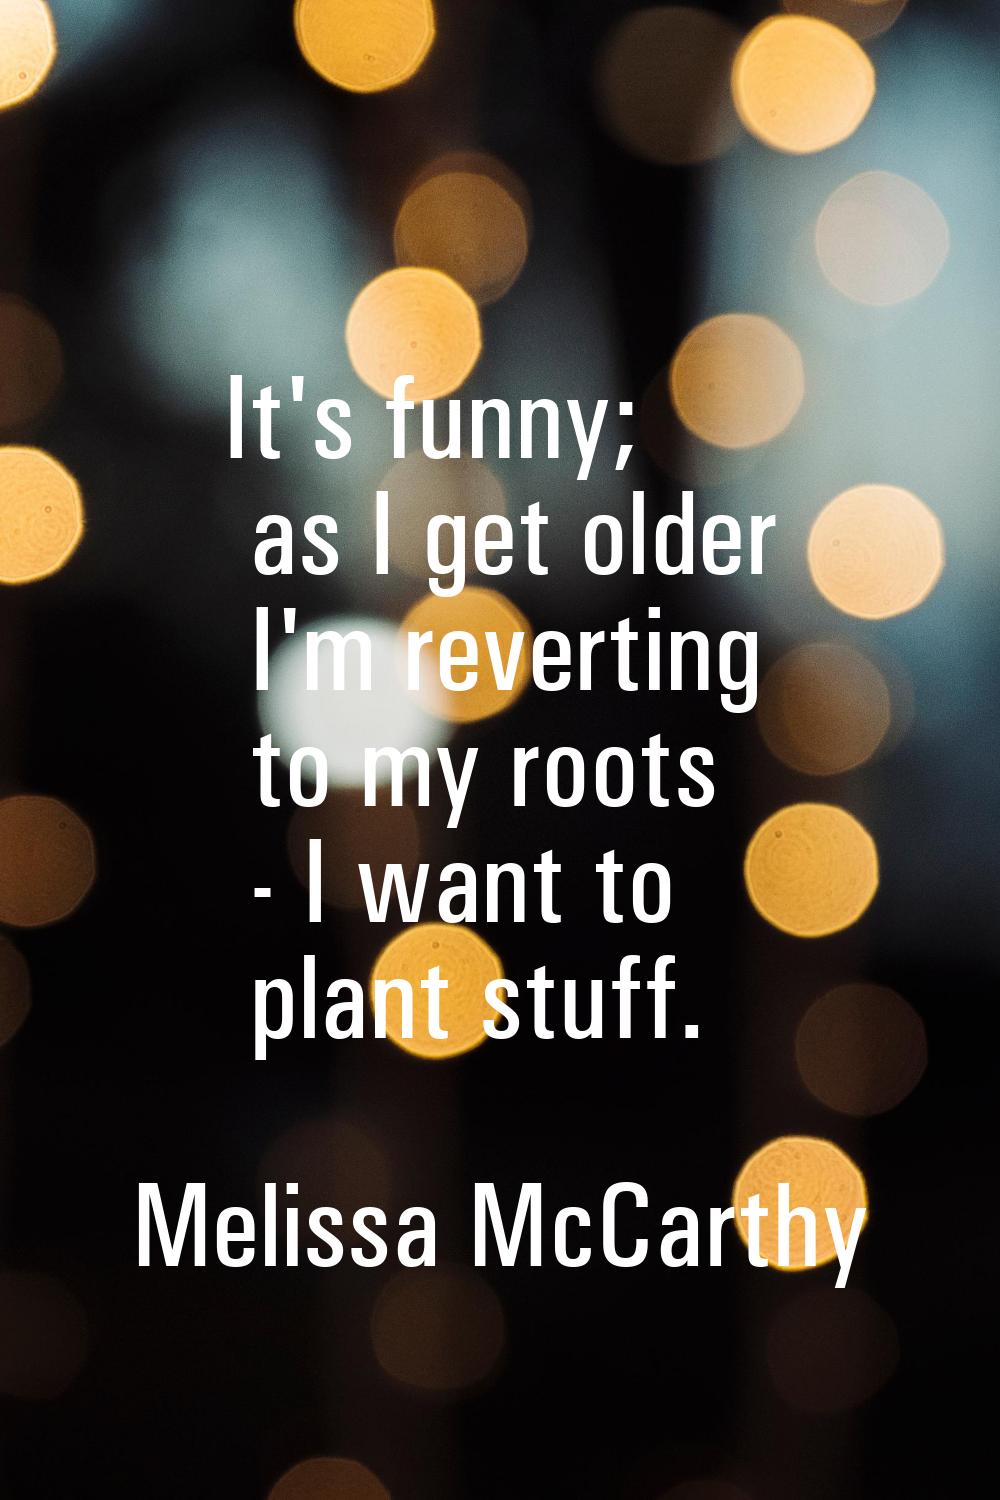 It's funny; as I get older I'm reverting to my roots - I want to plant stuff.